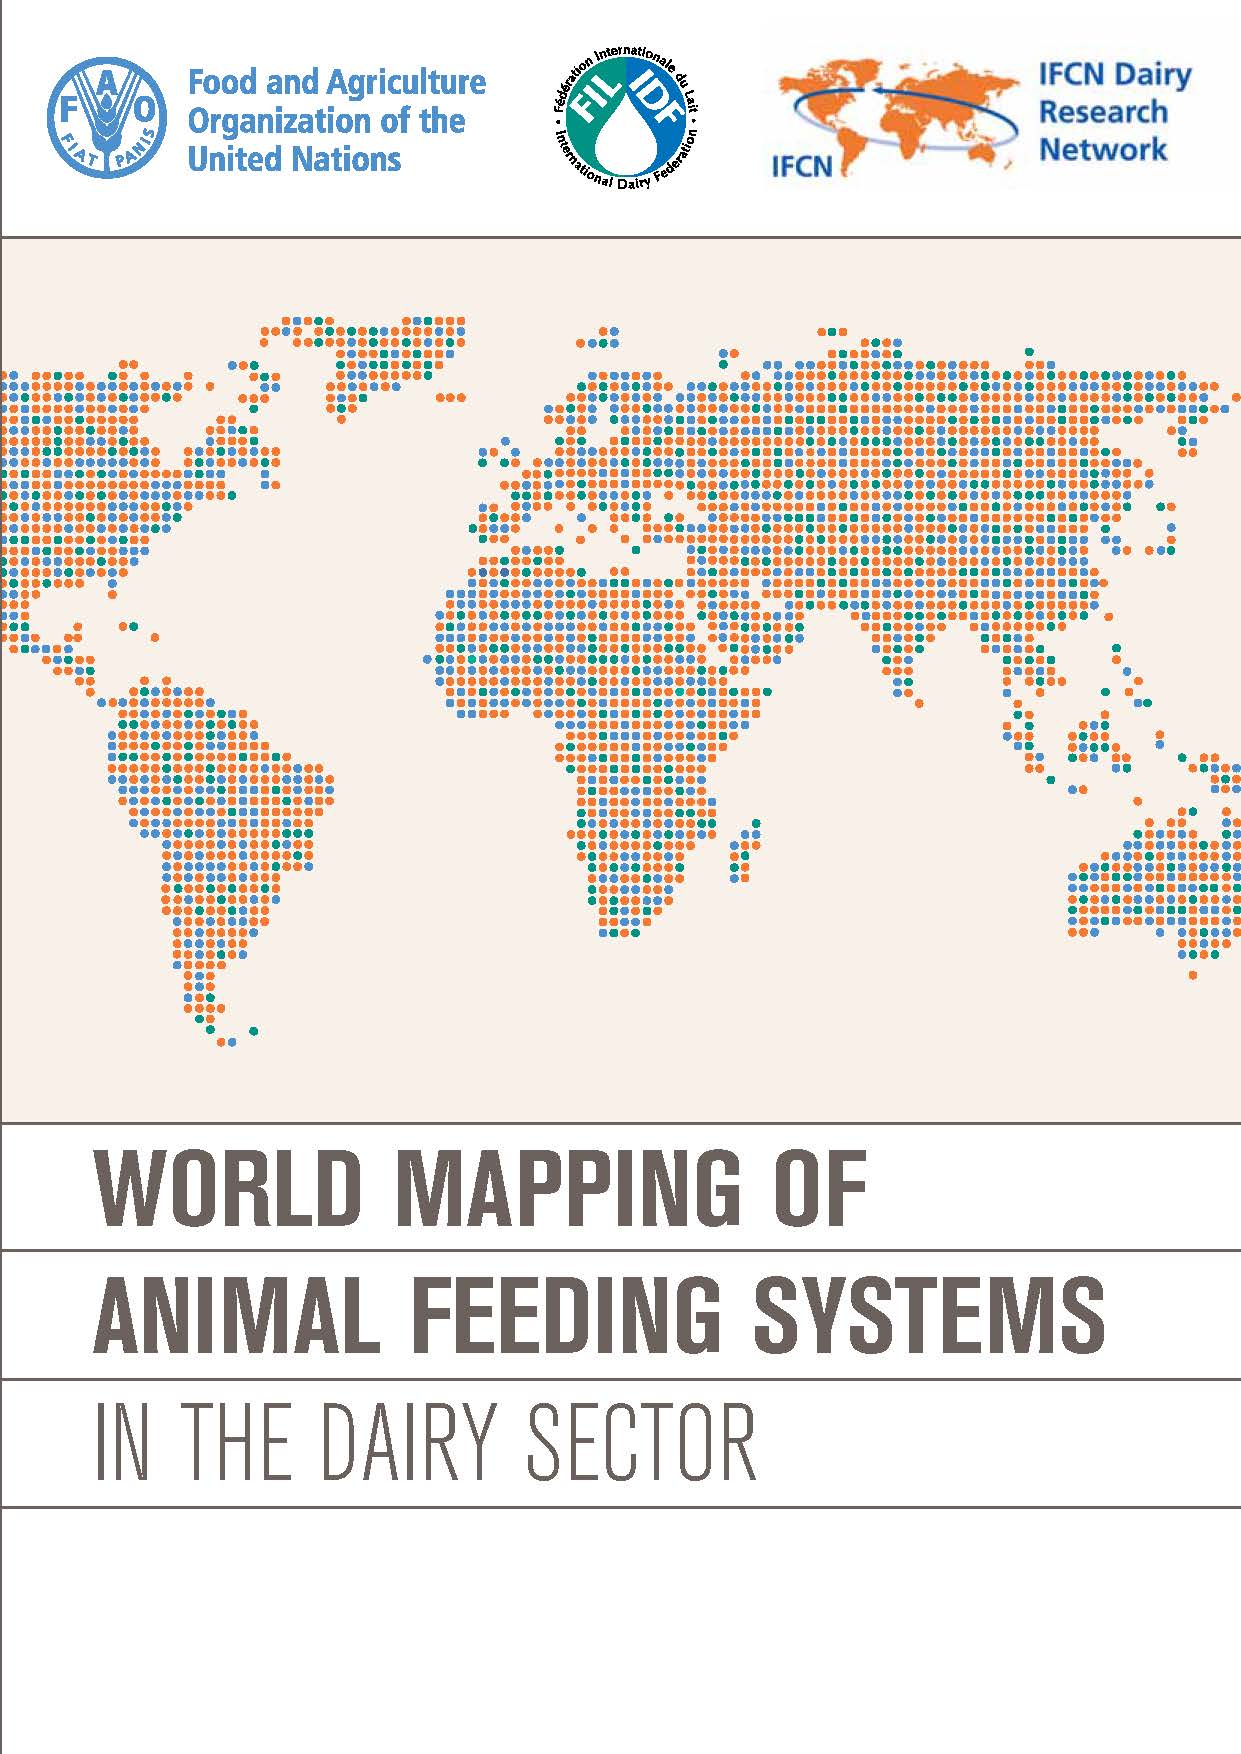 World Mapping of Animal Feeding Systems in the Dairy Sector - FIL-IDF